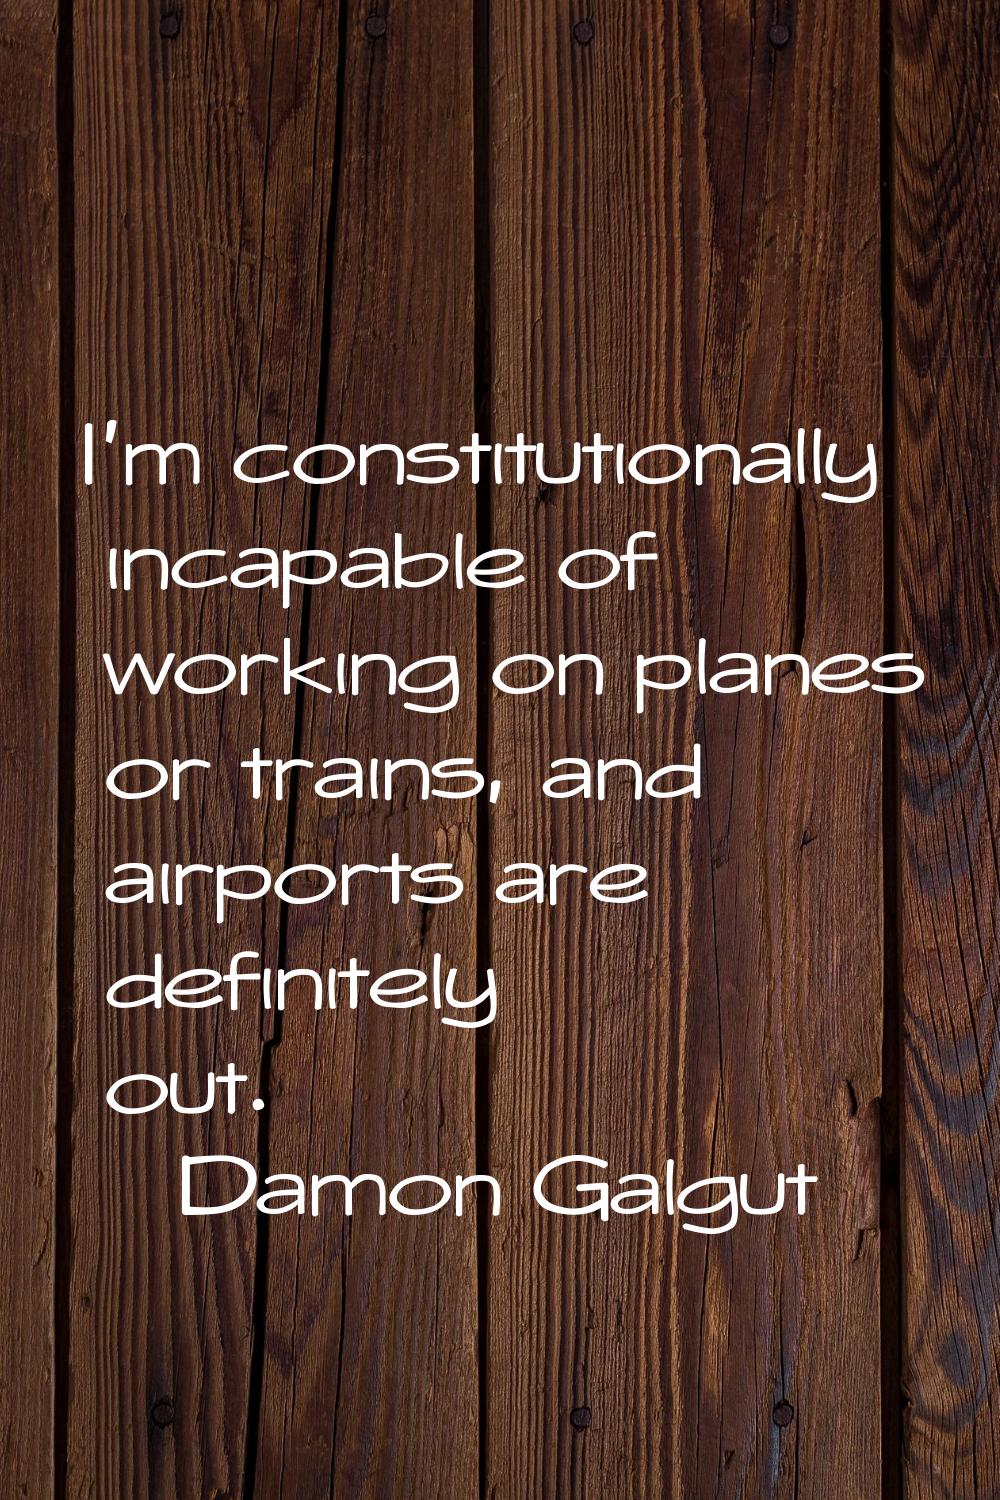 I'm constitutionally incapable of working on planes or trains, and airports are definitely out.